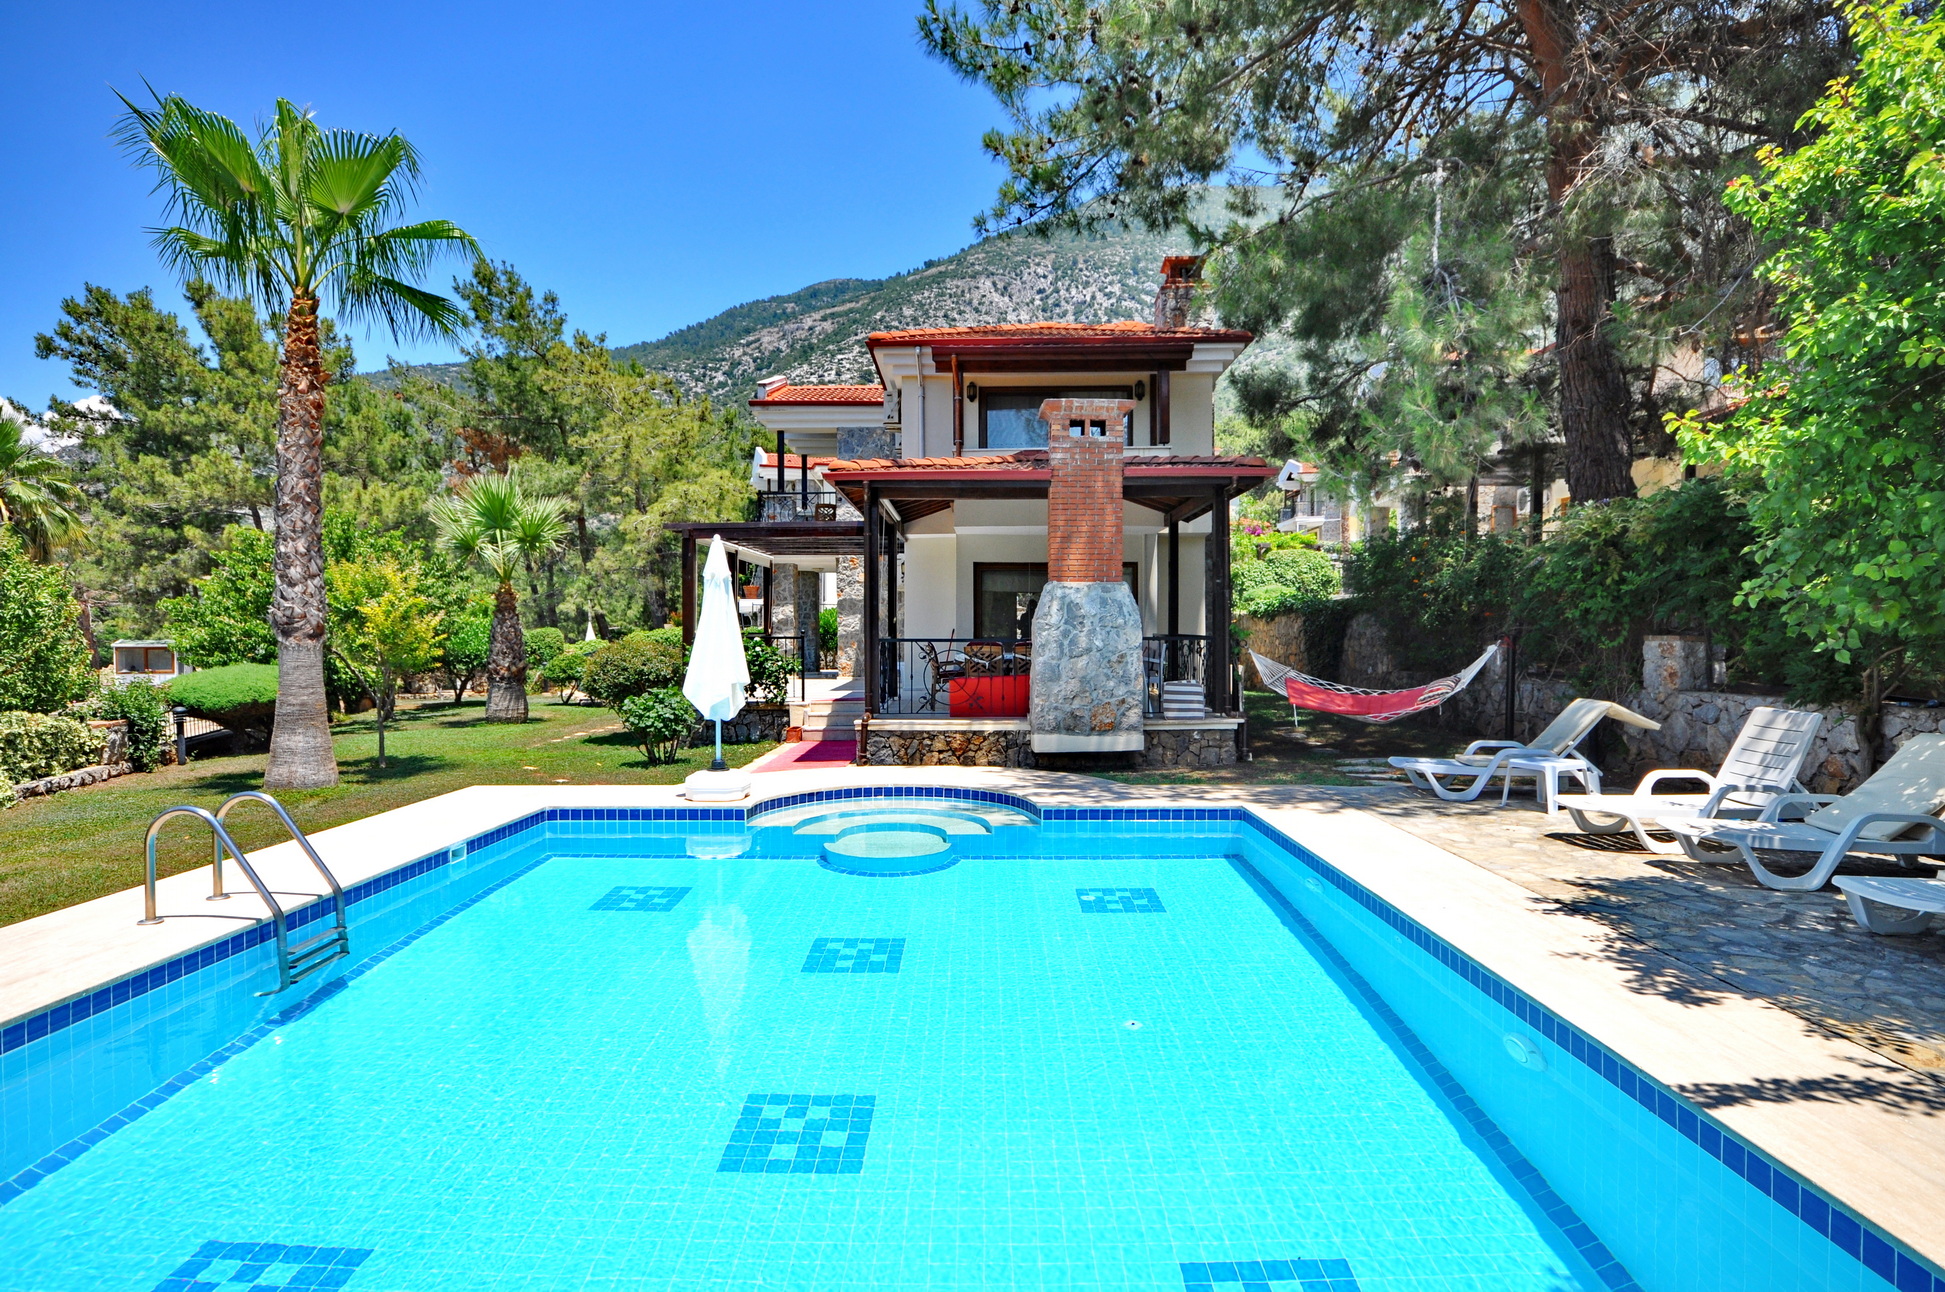 Immaculate 3 Bedroom Detached Villa with Private Pool & Large Mature Garden in Ovacik